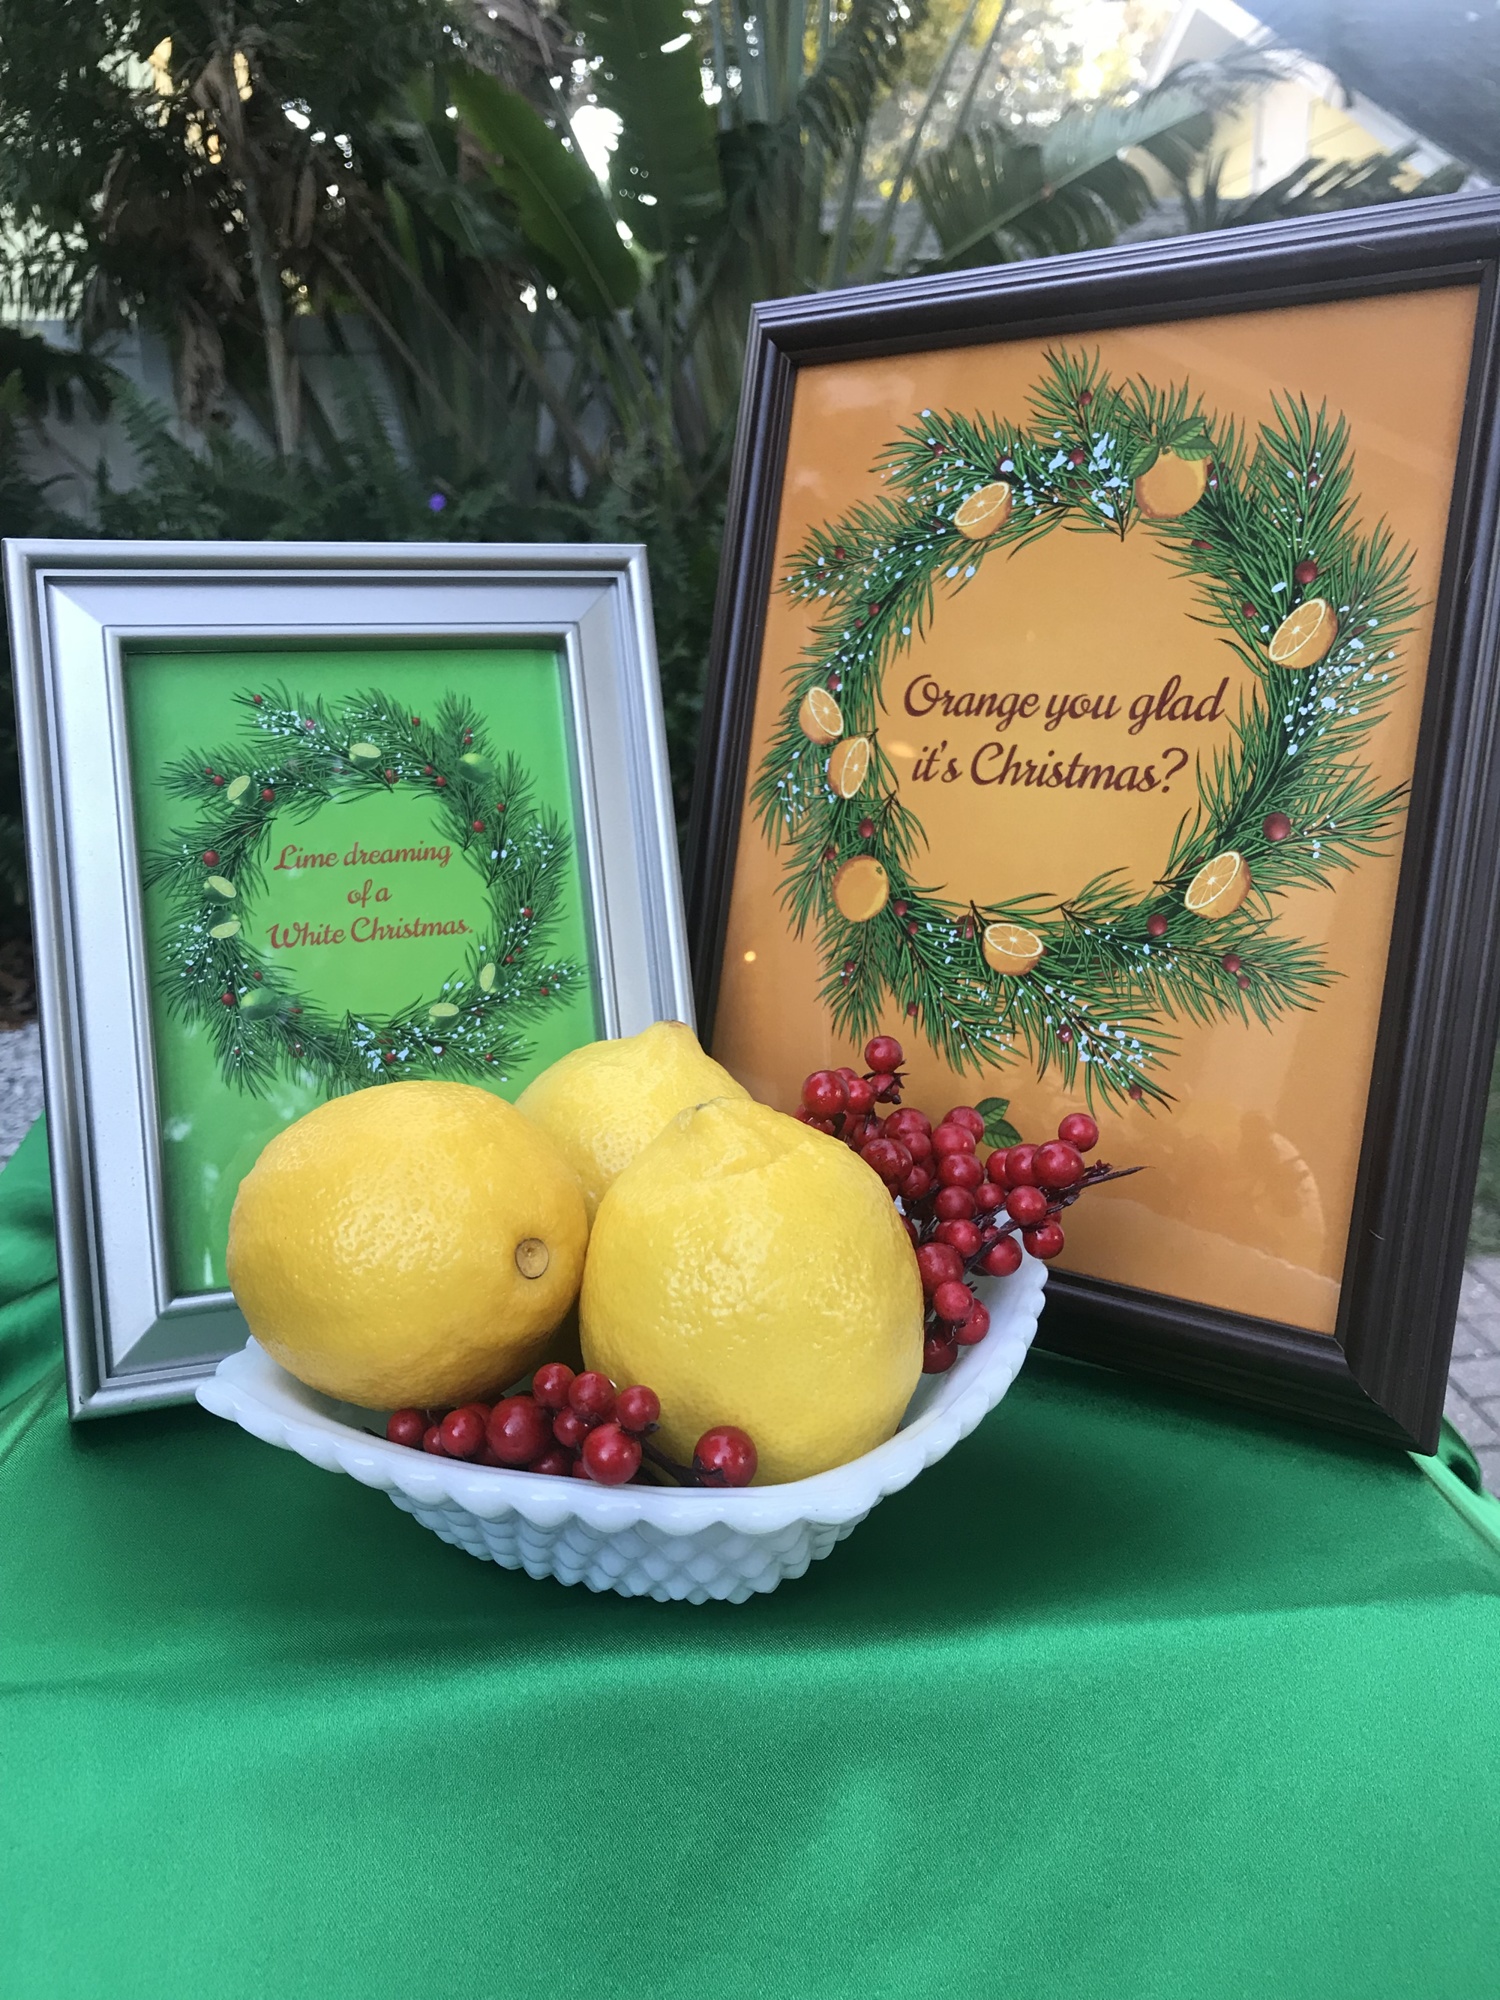 Erin Christy got creative with her decor for Christmas on Citrus. Courtesy photo